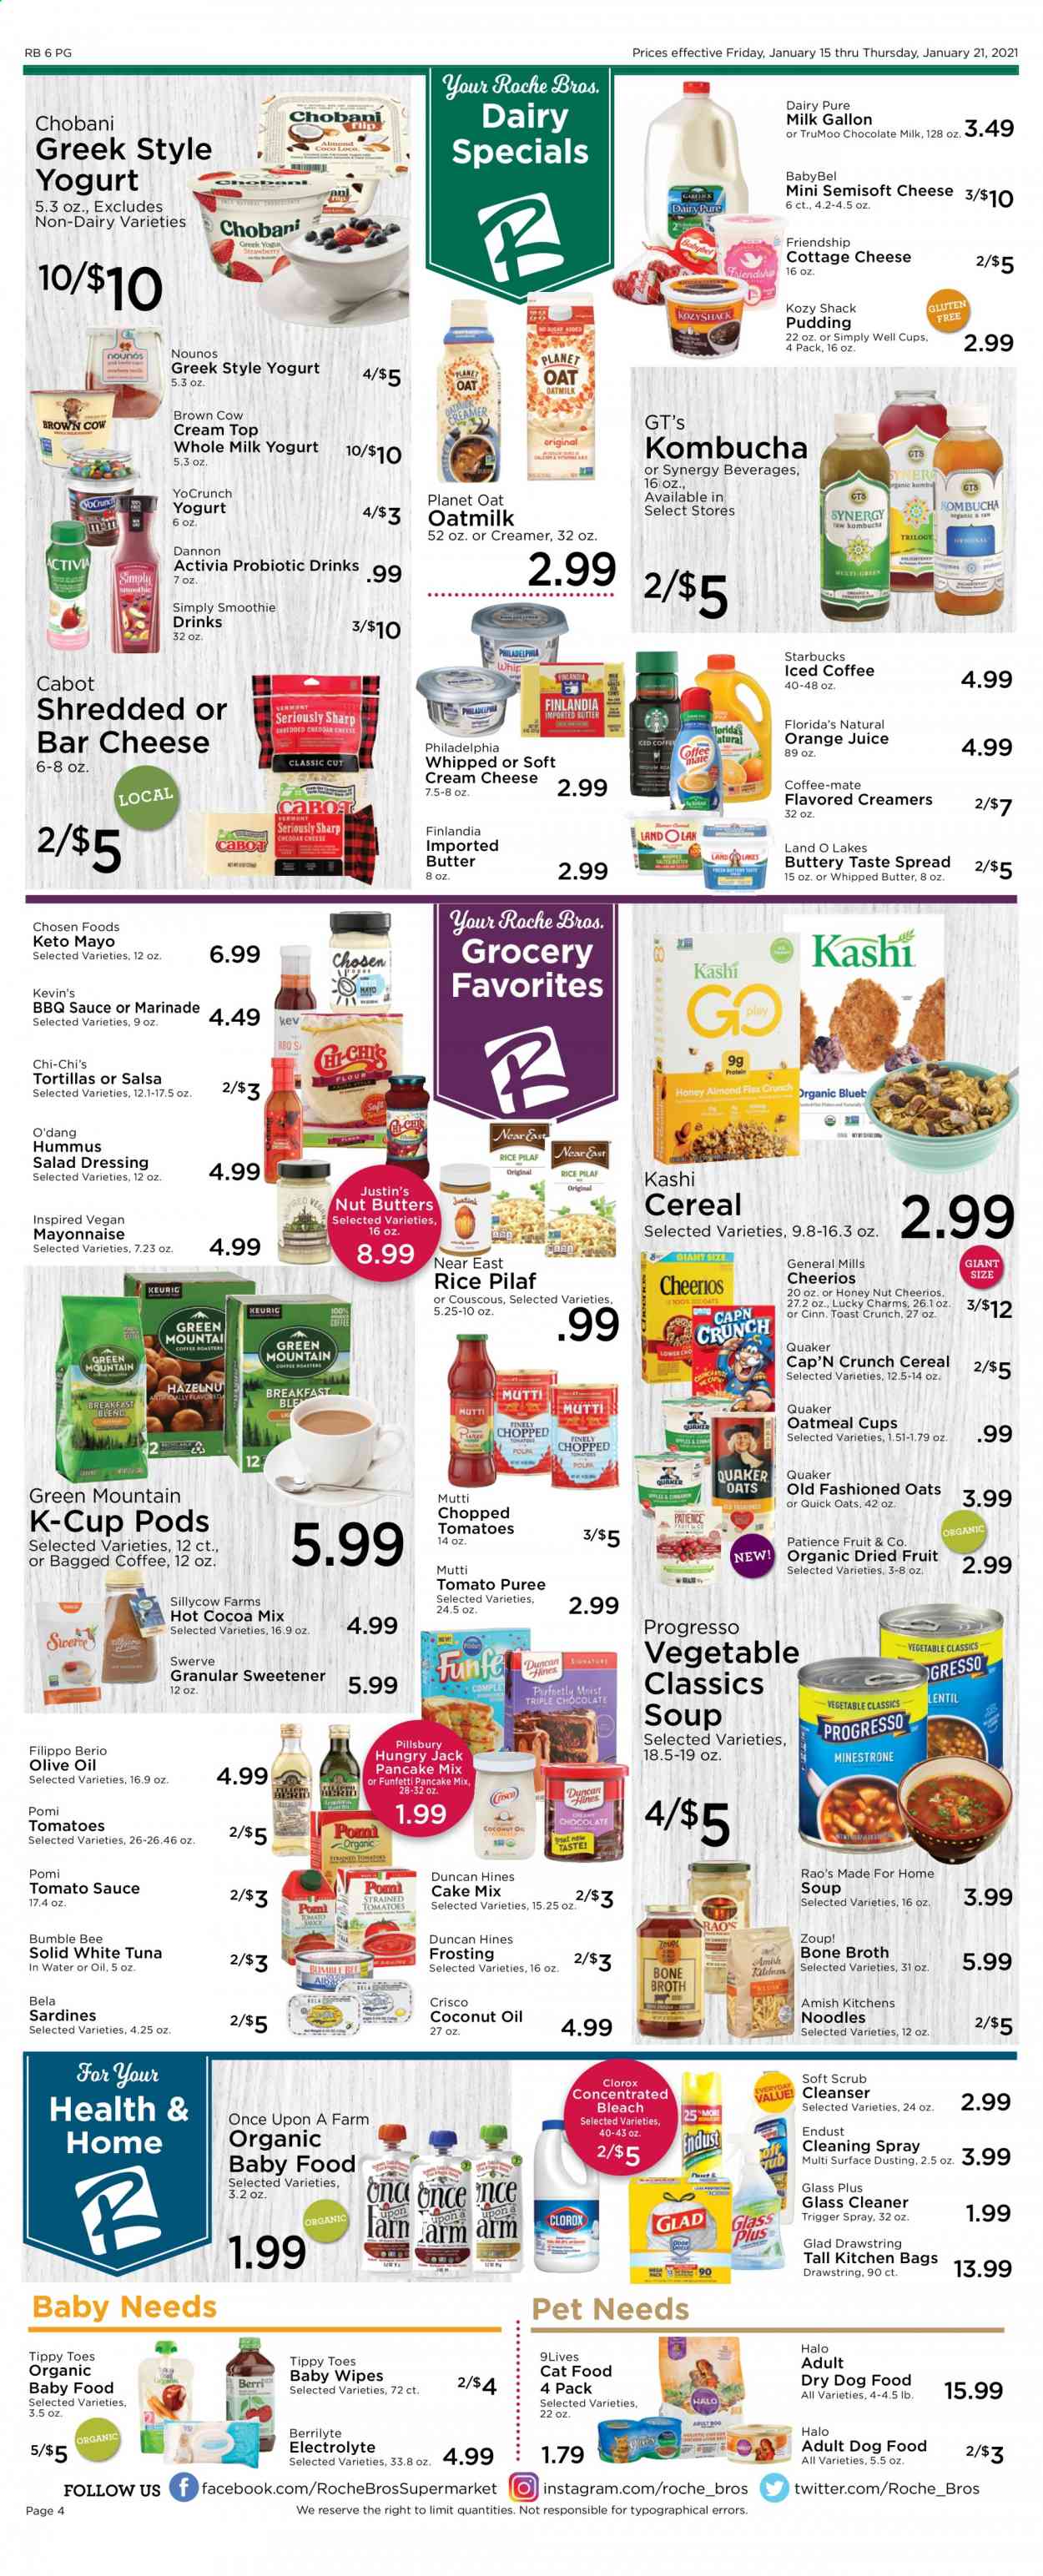 thumbnail - Roche Bros. Flyer - 01/15/2021 - 01/21/2021 - Sales products - tortillas, toast bread, cake mix, pancakes, sardines, tuna, cream cheese, soup, Pillsbury, Quaker, Progresso, hummus, cottage cheese, Philadelphia, cheese, Babybel, pudding, yoghurt, Activia, Chobani, Dannon, Coffee-Mate, milk, oat milk, whipped butter, creamer, mayonnaise, salsa, chocolate, Florida's Natural, Crisco, frosting, oatmeal, broth, tomato puree, chopped tomatoes, cereals, Cheerios, Cap'n Crunch, Quick Oats, couscous, rice, noodles, marinade, BBQ sauce, salad dressing, tomato sauce, dressing, coconut oil, olive oil, dried fruit, orange juice, juice, smoothie, iced coffee, kombucha, hot cocoa, Starbucks, coffee capsules, K-Cups, bagged coffee, Green Mountain, baby wipes, wipes, cleaner, glass cleaner, Clorox, bleach, cleanser, animal food, cat food, dog food, 9lives, dry dog food. Page 4.